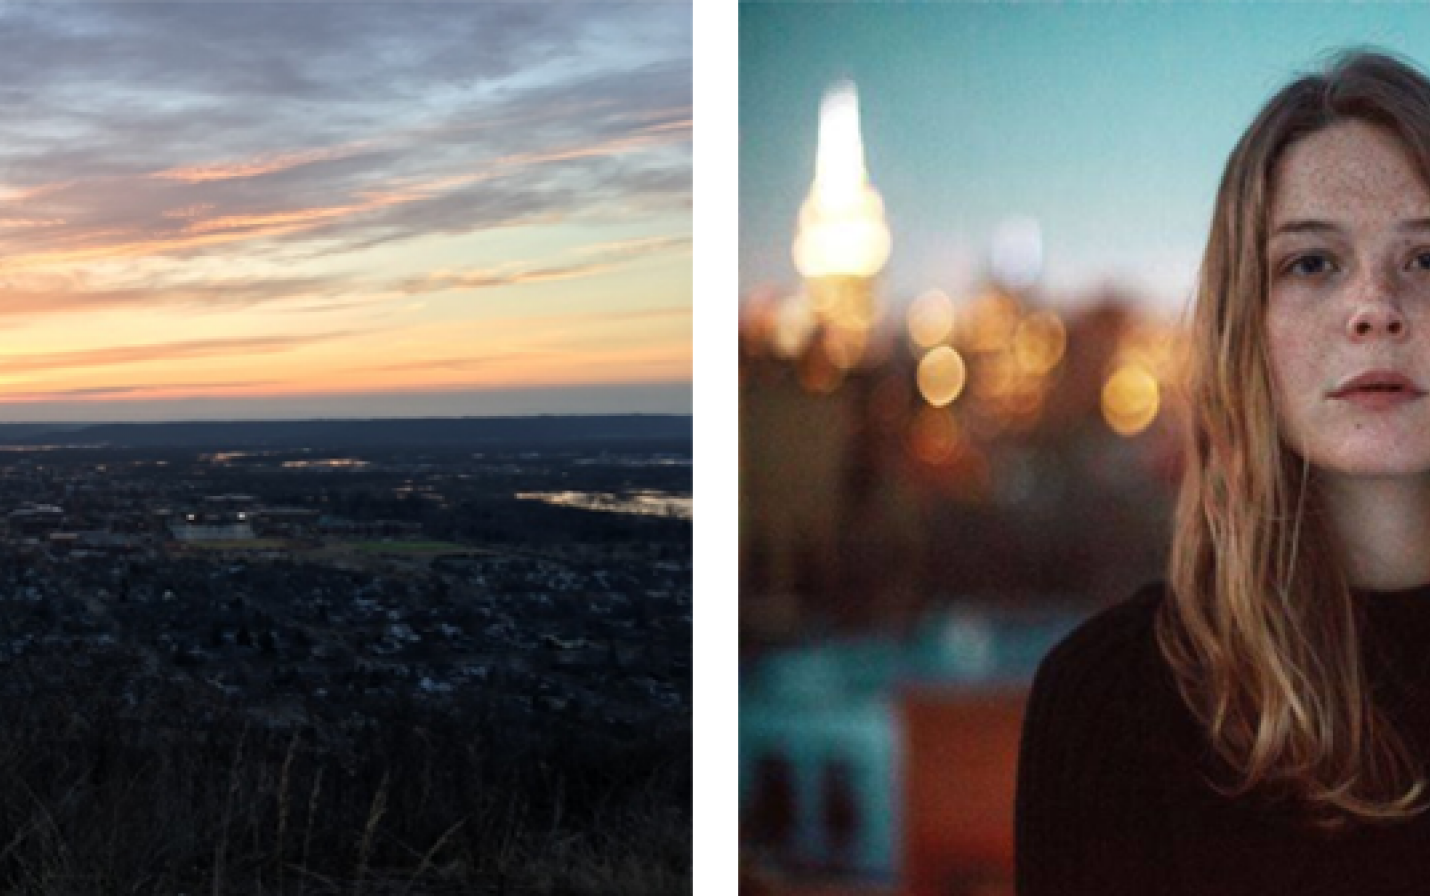 Overlook of the city of La Crosse and separate photo of the author